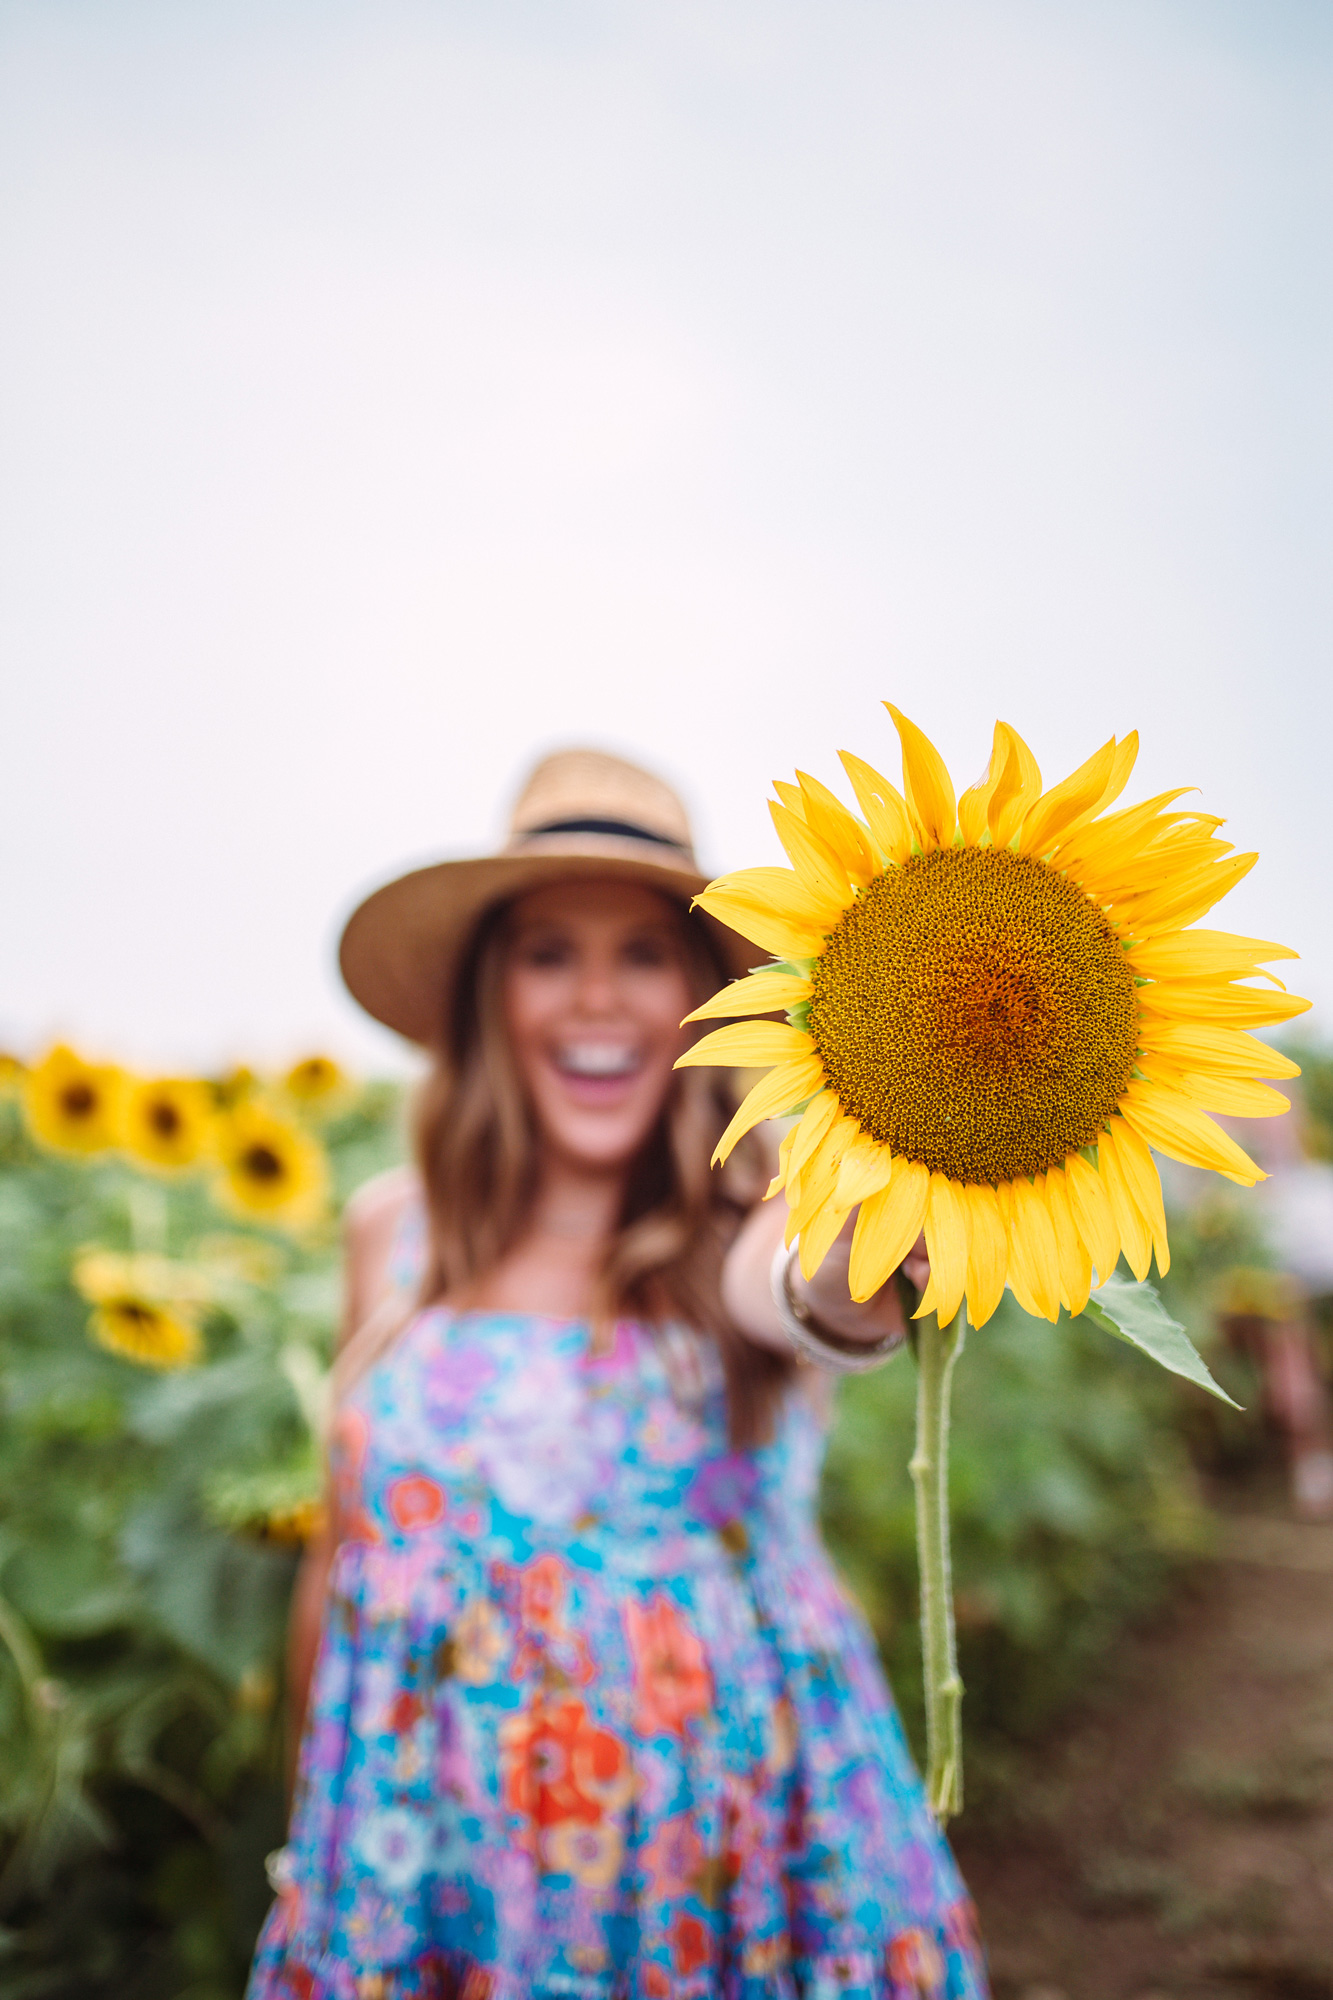 Free People Floral Maxi Dress in the Sunflowers - Glitter & Gingham